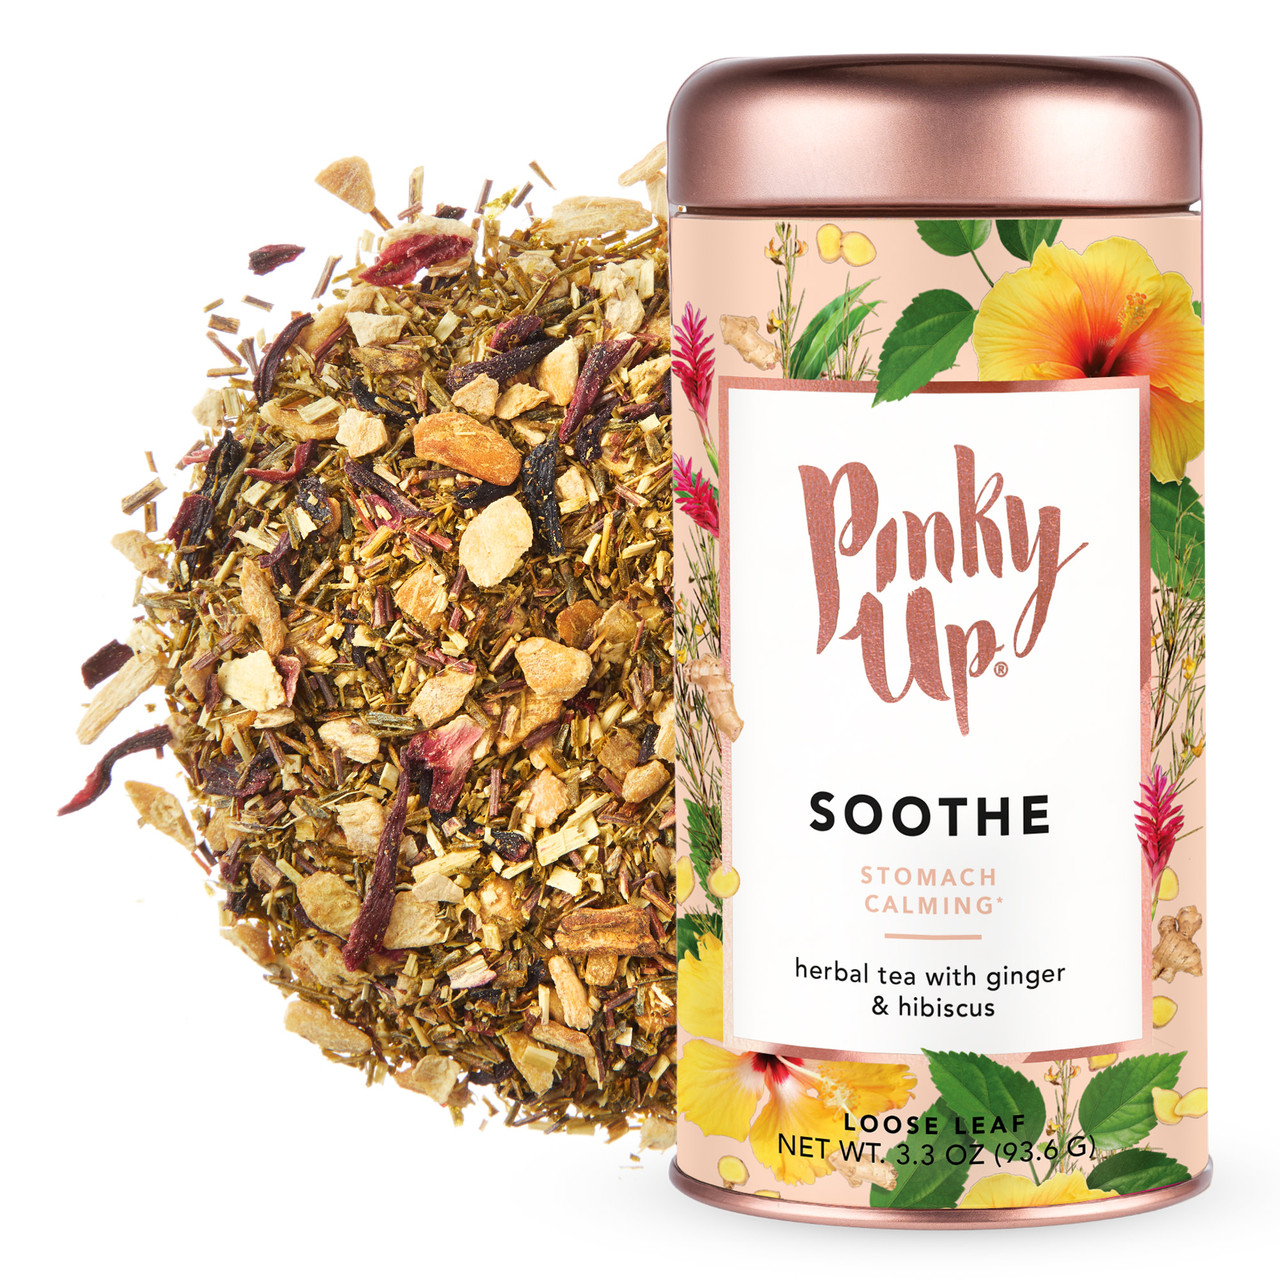 Soothe Loose Leaf Tea Tins by Pinky Up